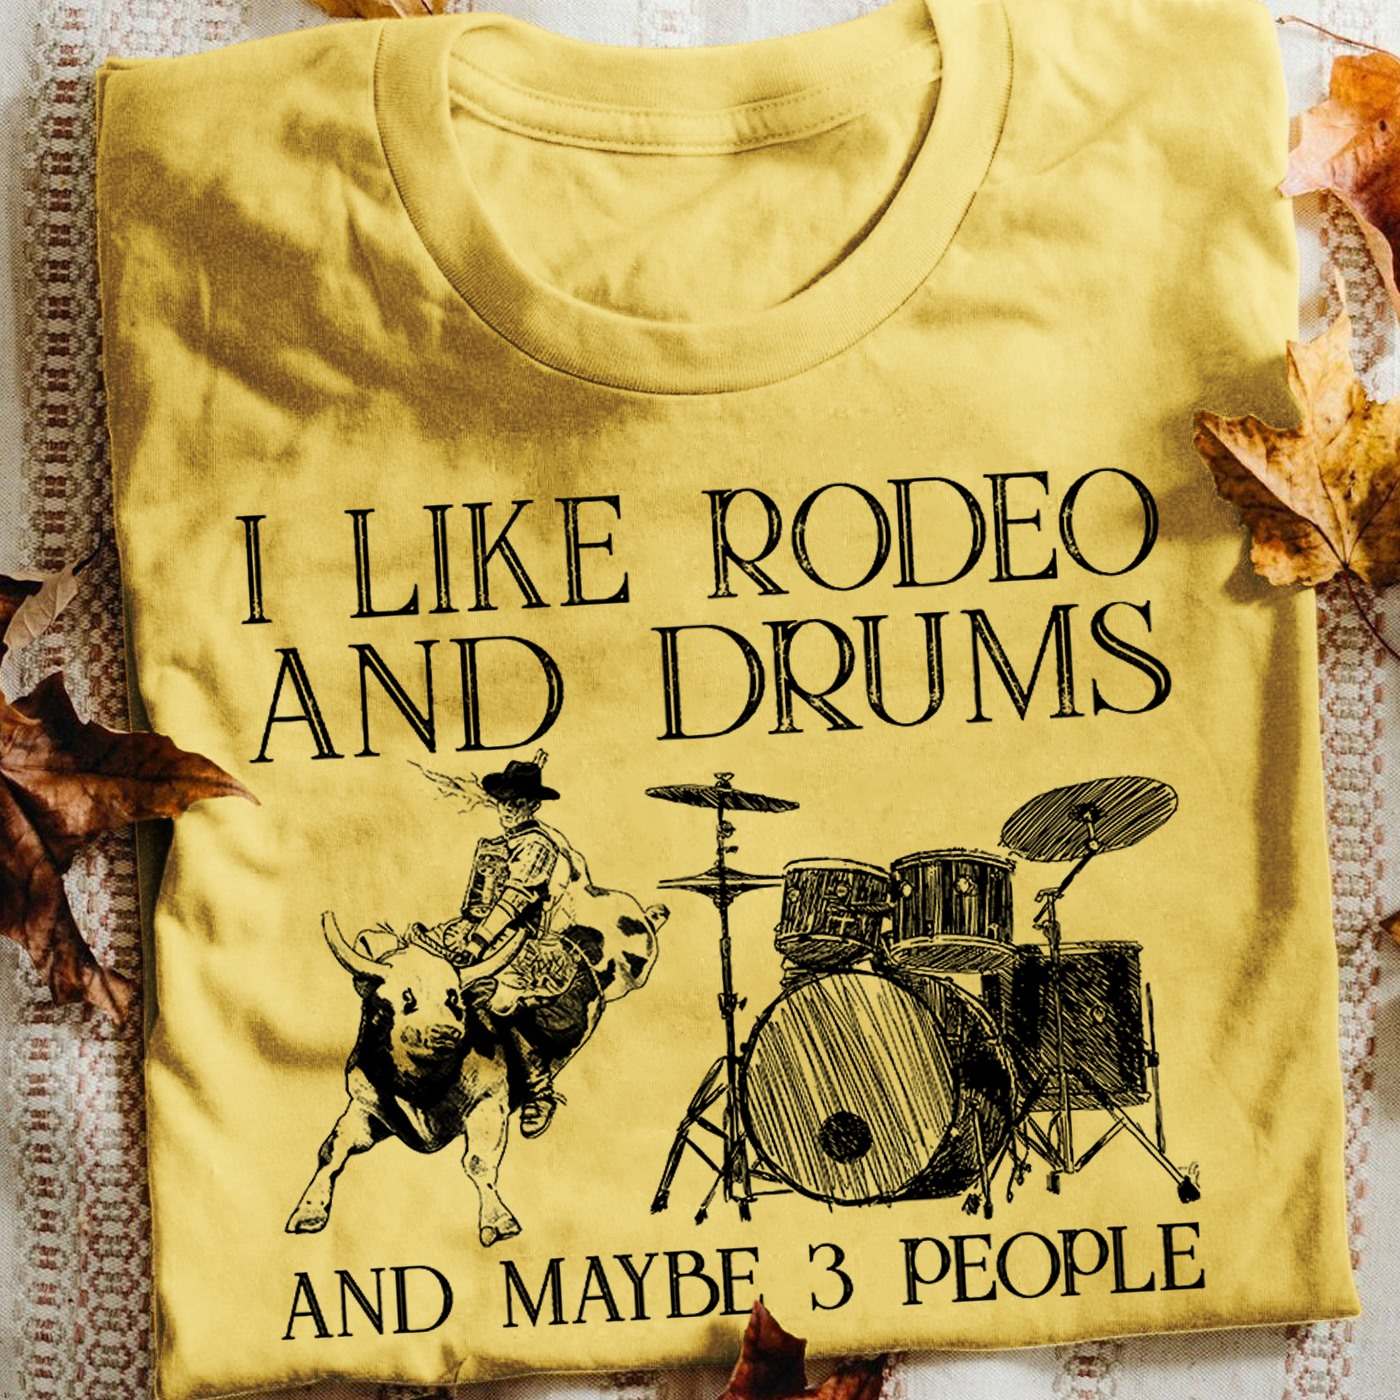 I like rodeo and drums and maybe 3 people - The drummer